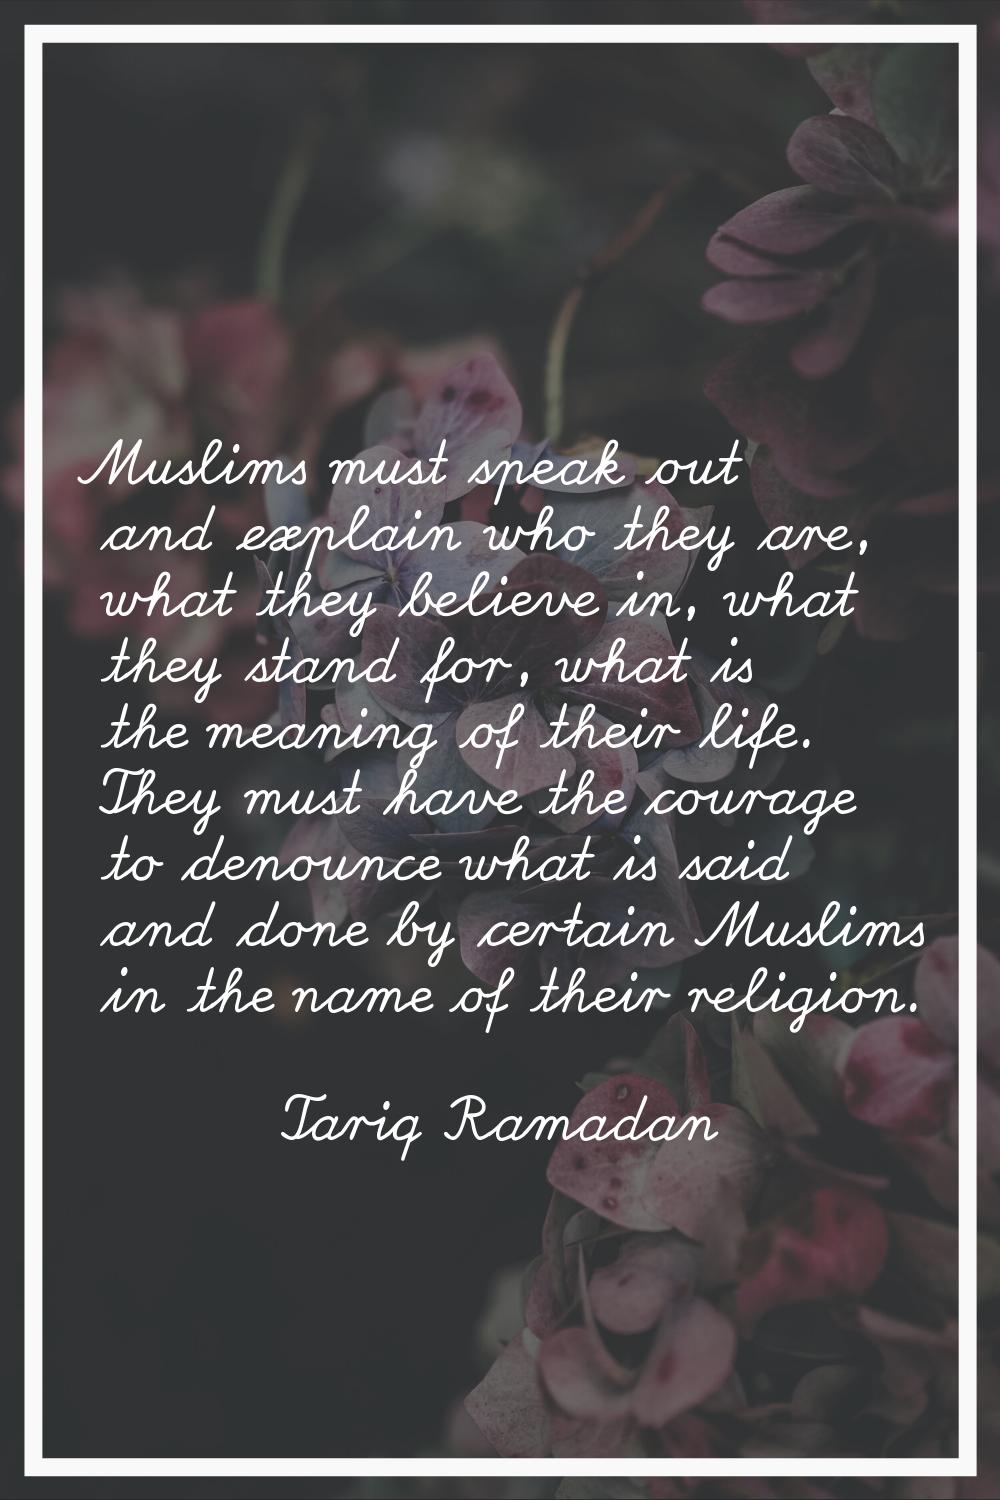 Muslims must speak out and explain who they are, what they believe in, what they stand for, what is